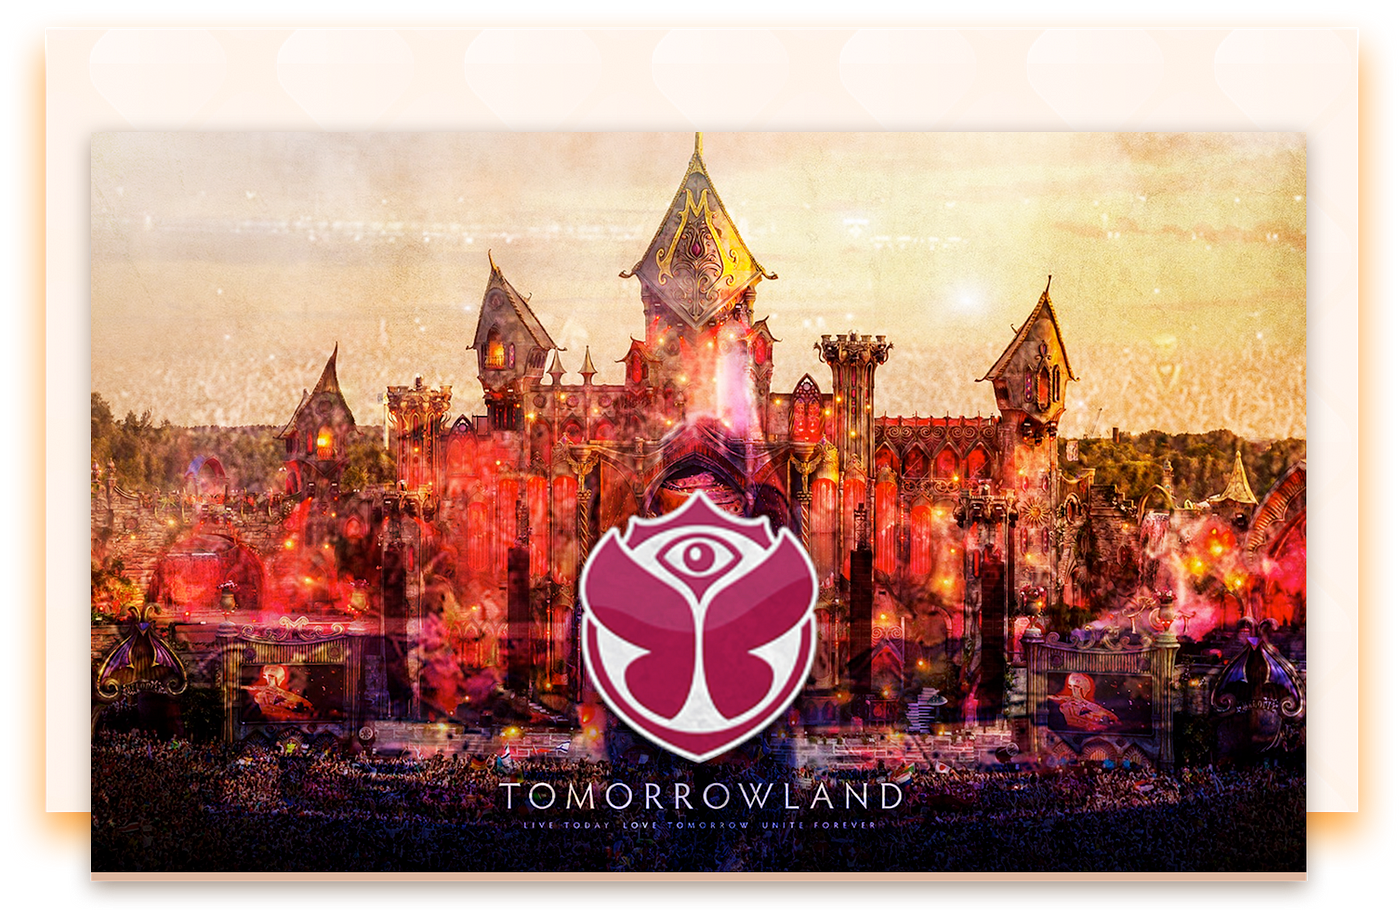 Tale Of Us deliver a mind-blowing set at Tomorrowland weekend 1